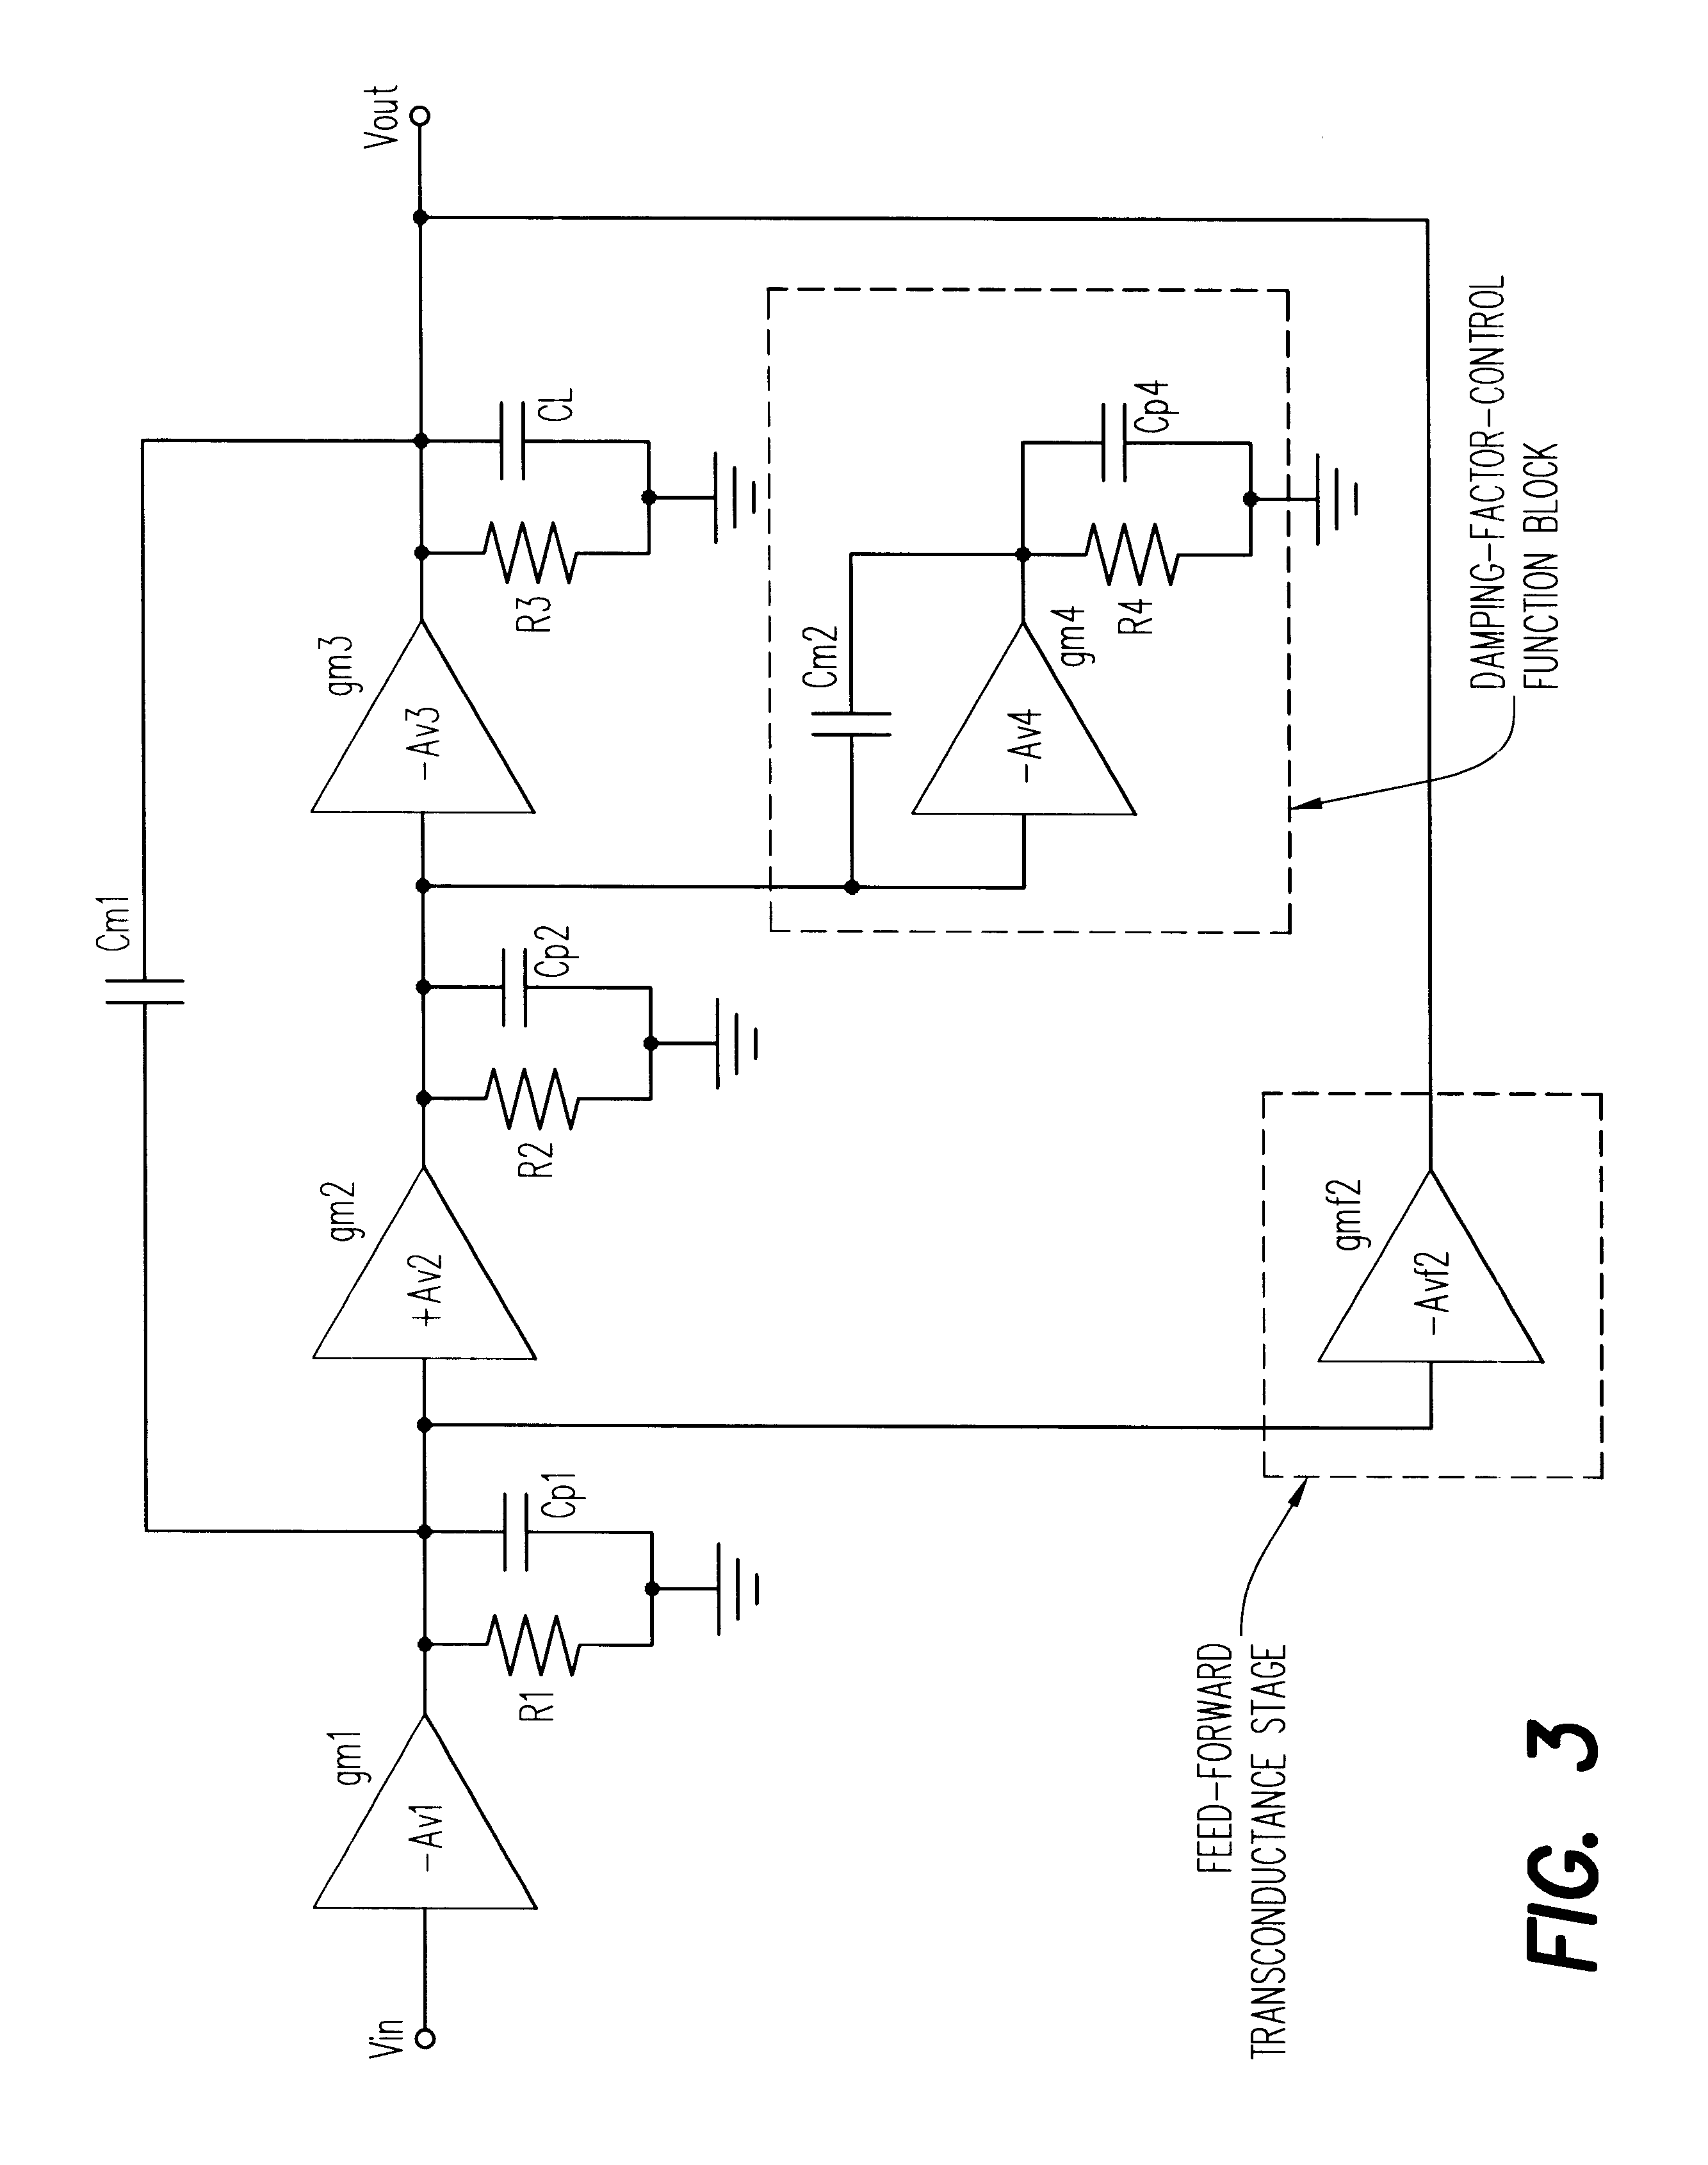 Frequency compensation techniques for low-power multistage amplifiers